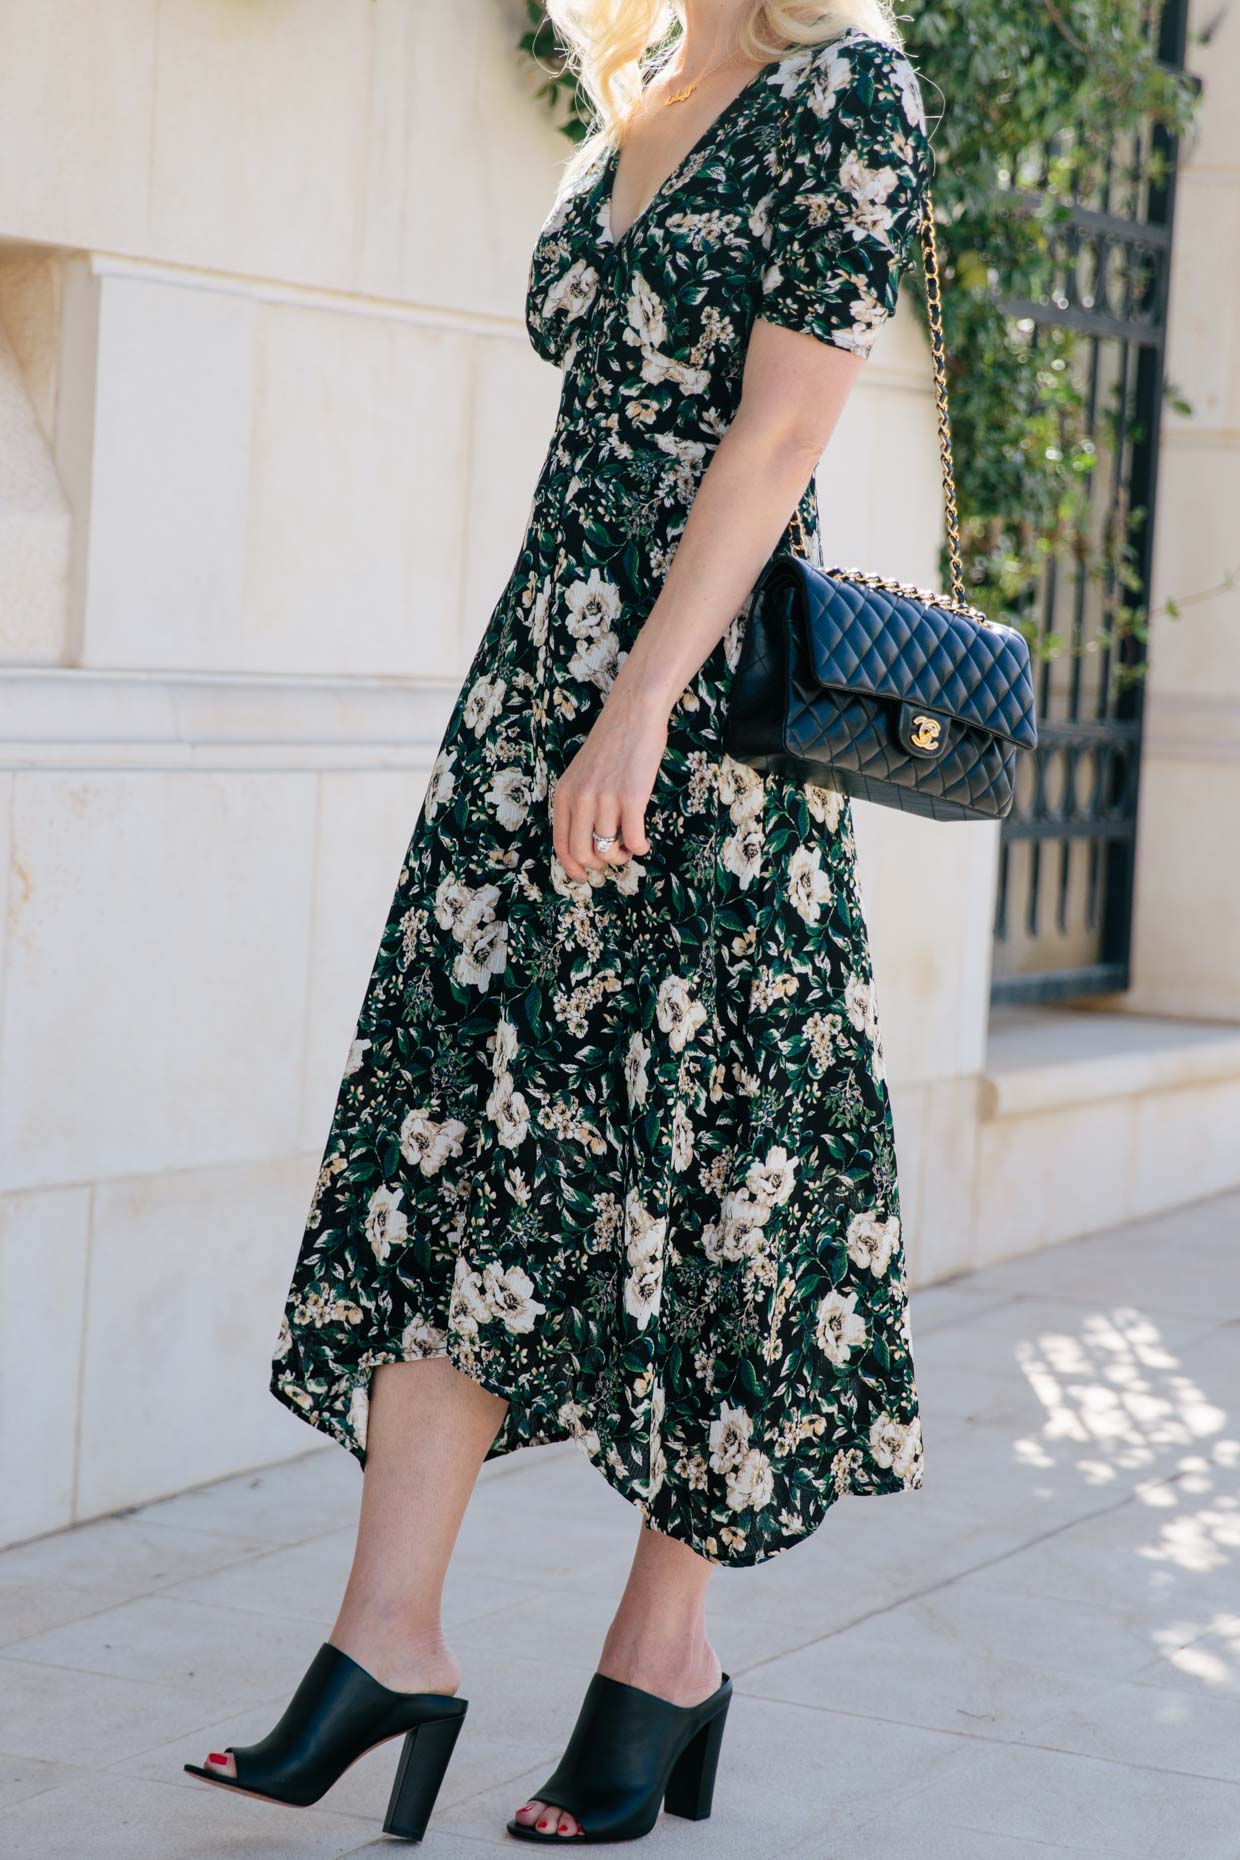 An Easy Way to Wear Your Summer Dresses into Fall - Meagan's Moda